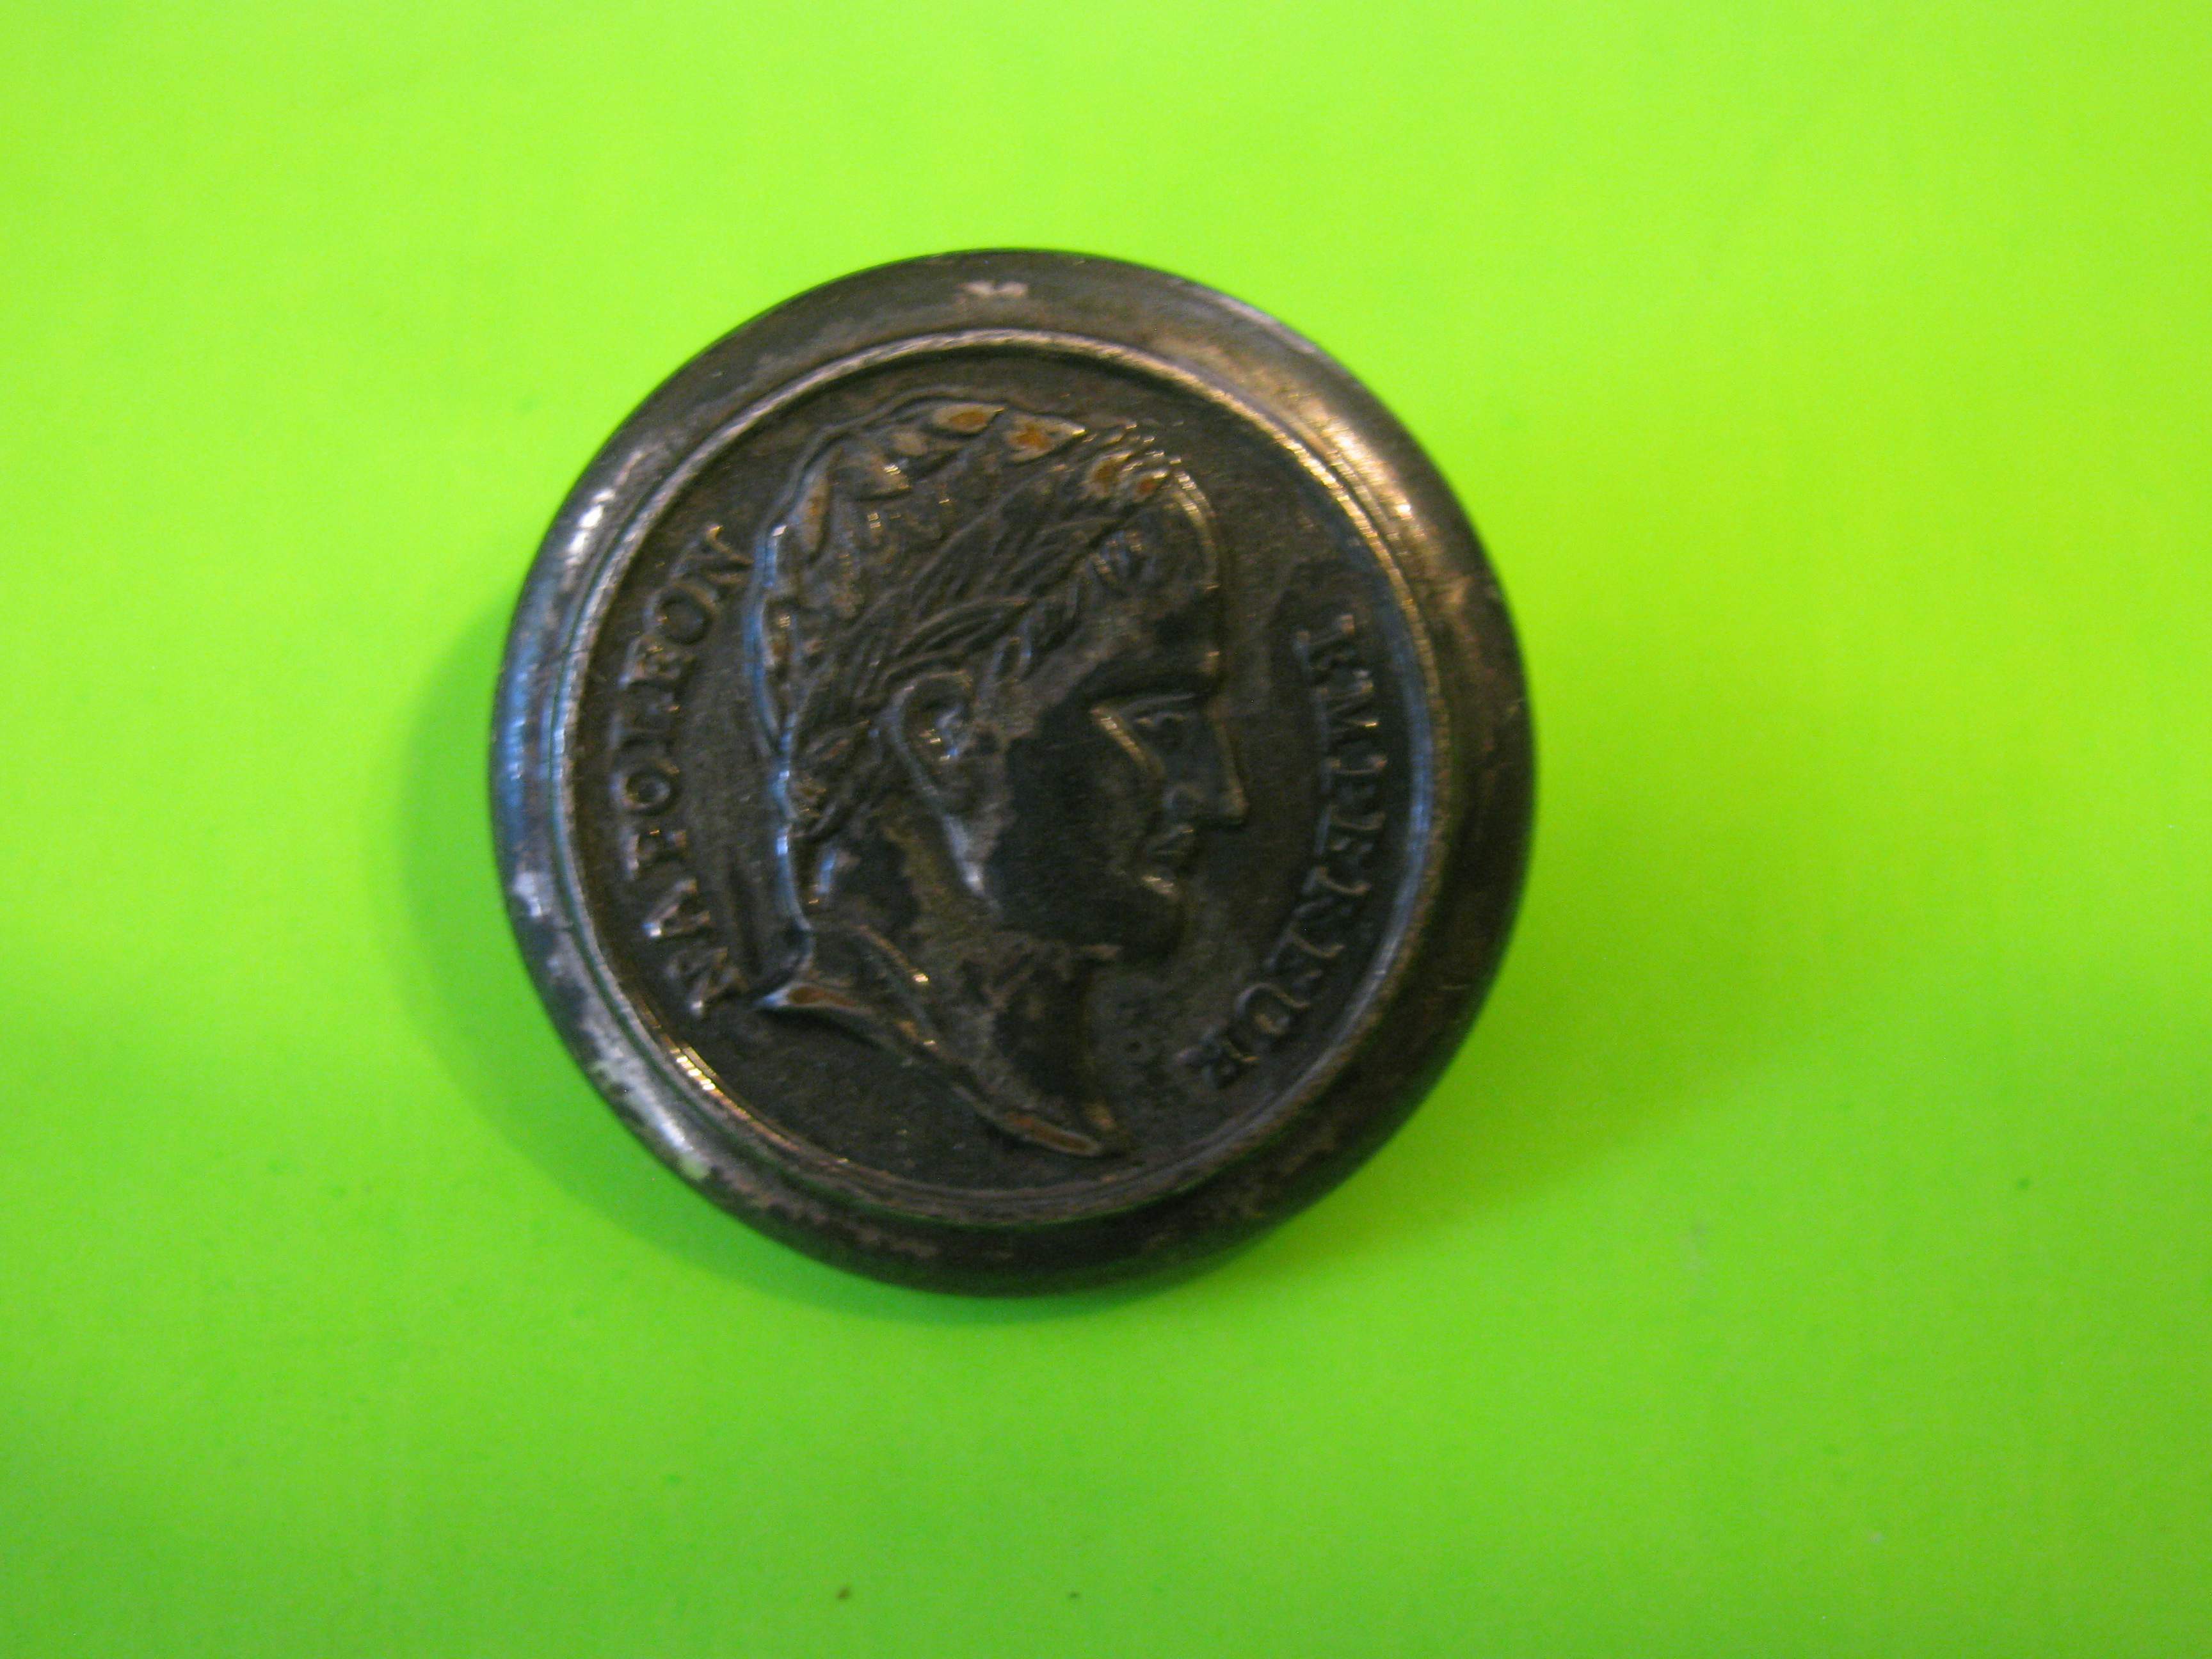 EMPEREUR NAPOLEON on Metal Button with Metal Loop Shank